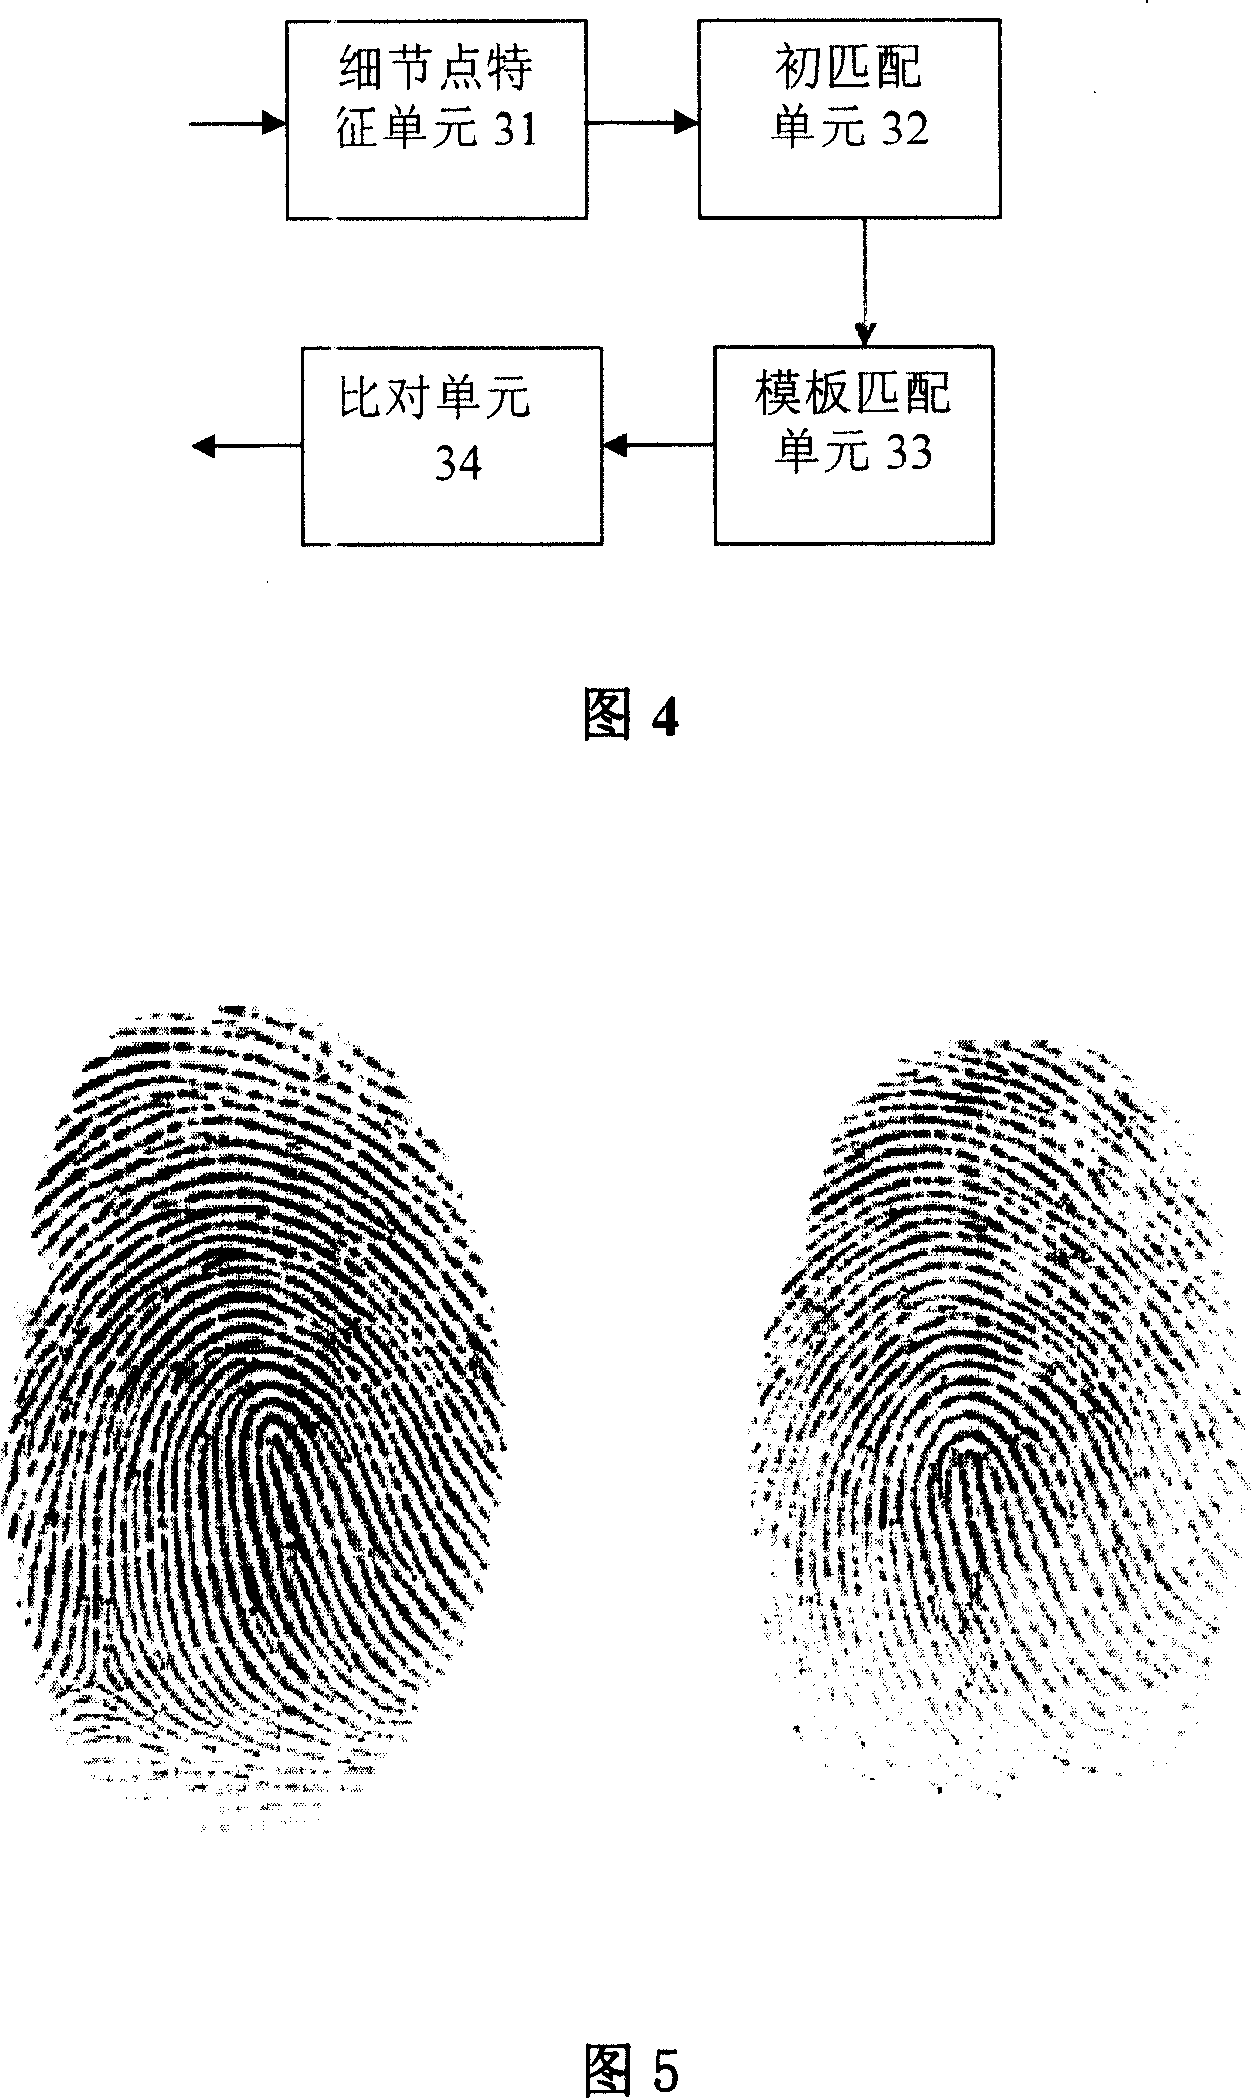 System and method for recognizing analog fingerprint of twins based on partial structure